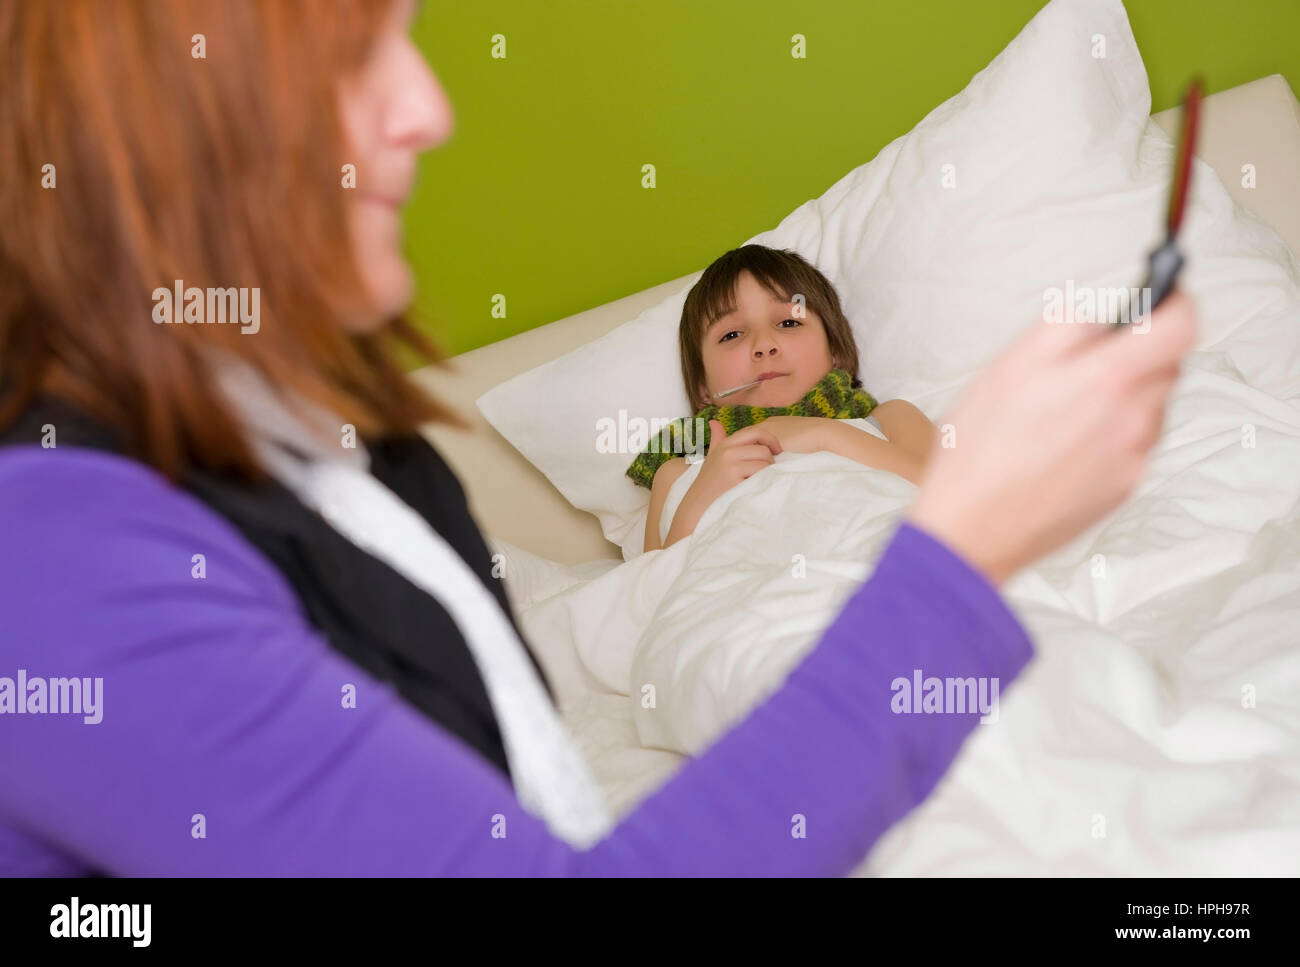 Krankes Kind liegt im Bett, Mutter ruft den Arzt an - child in bed, mother calls the doctor, Model released Stock Photo